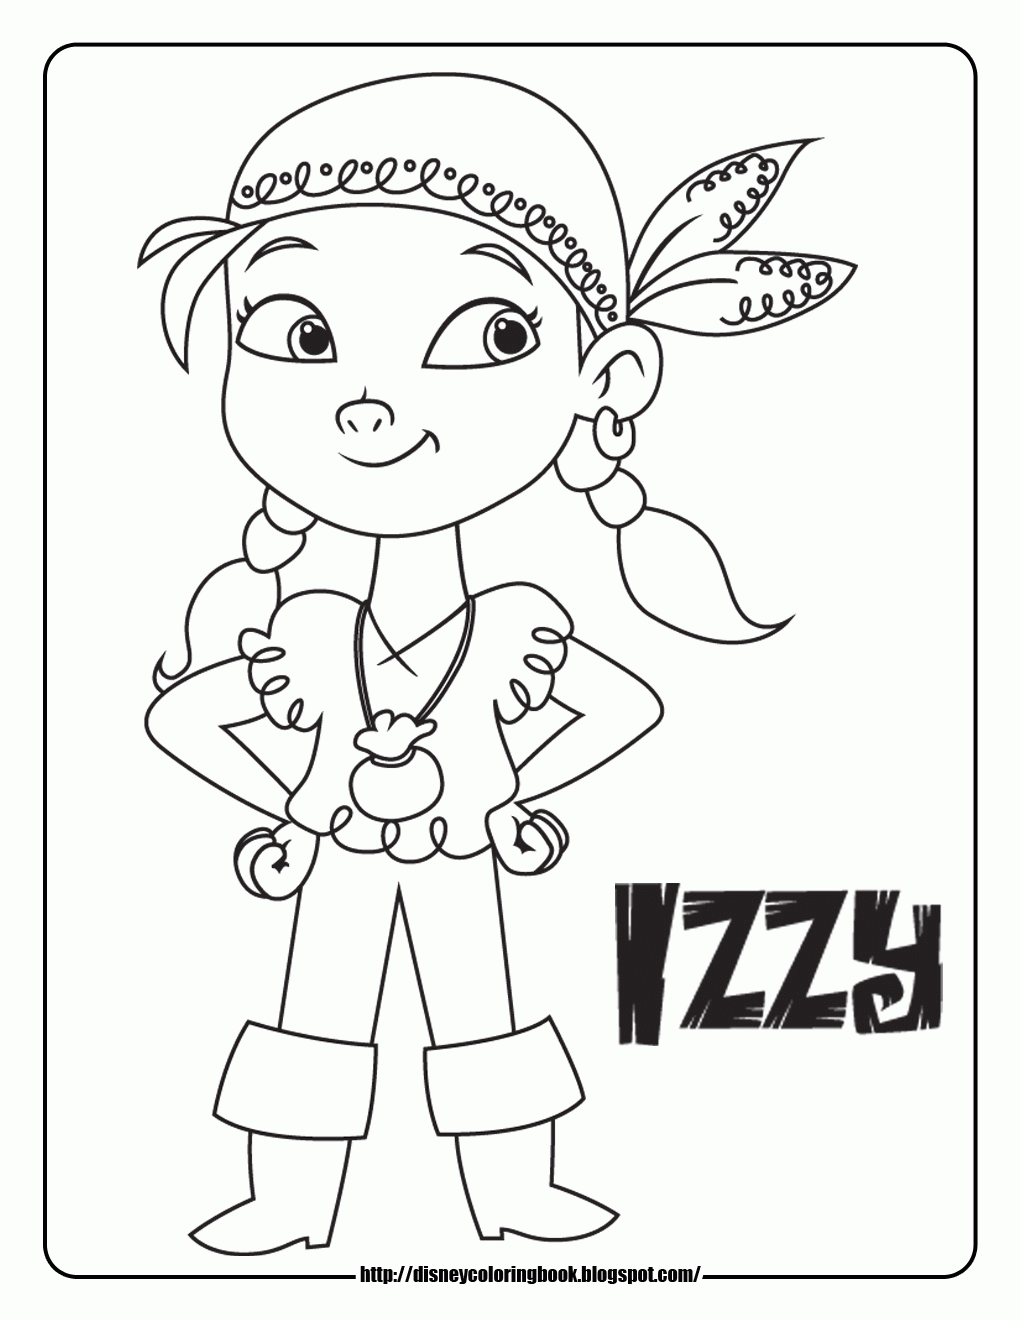 Captain Hook from Jake and the Neverland Pirates Coloring Pages ...